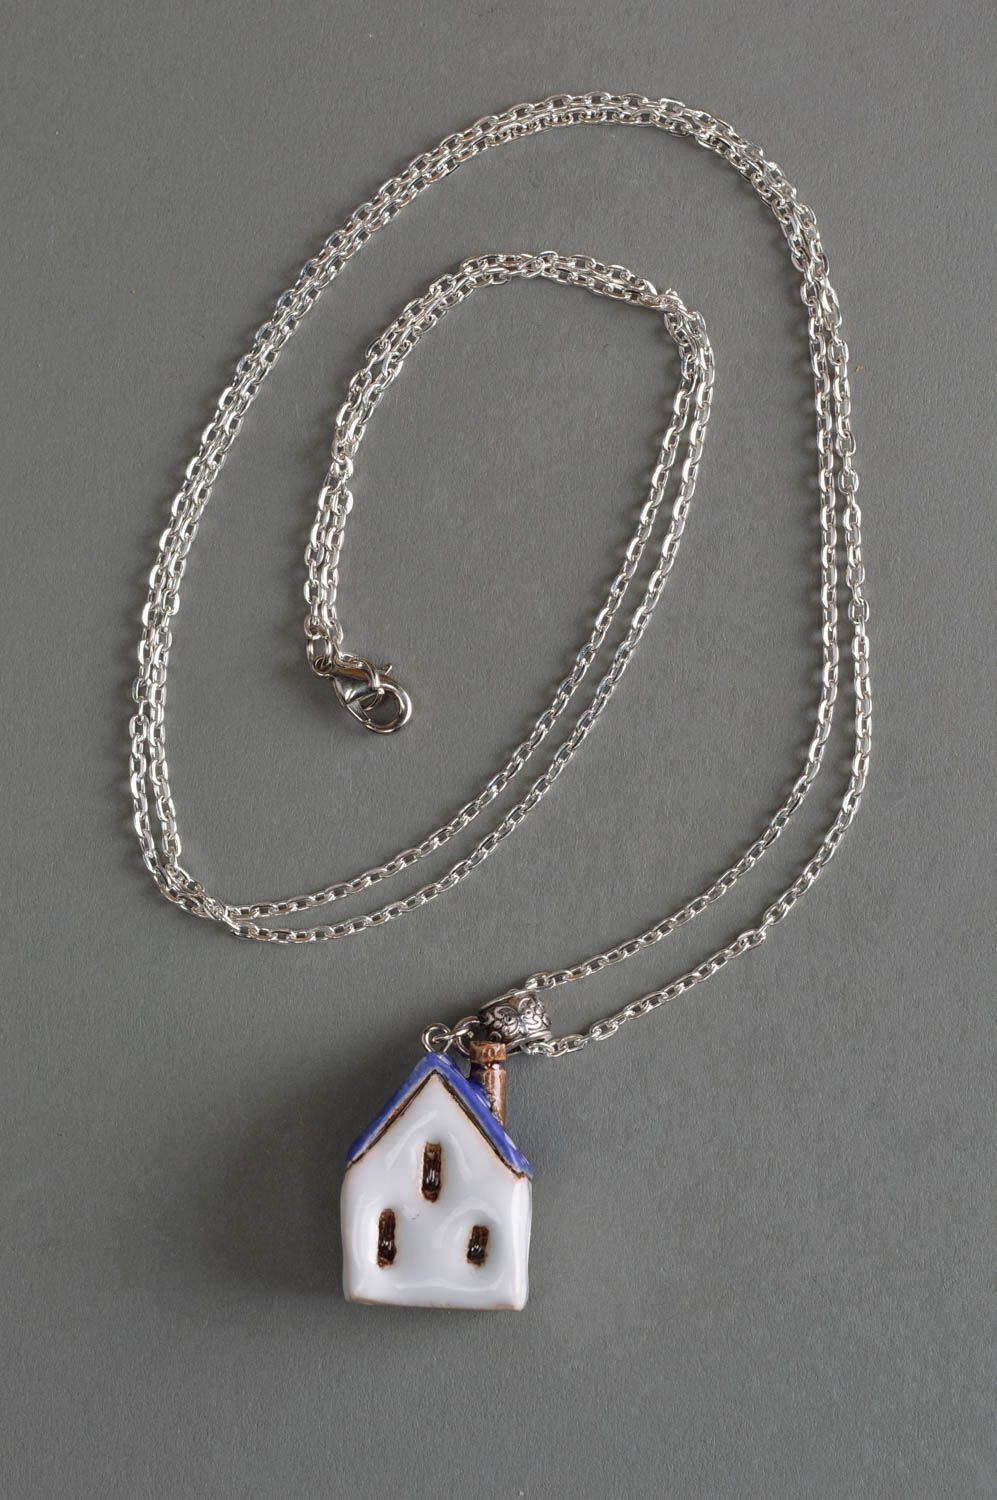 Unusual handmade designer painted ceramic neck pendant in the shape of house on long chain photo 1